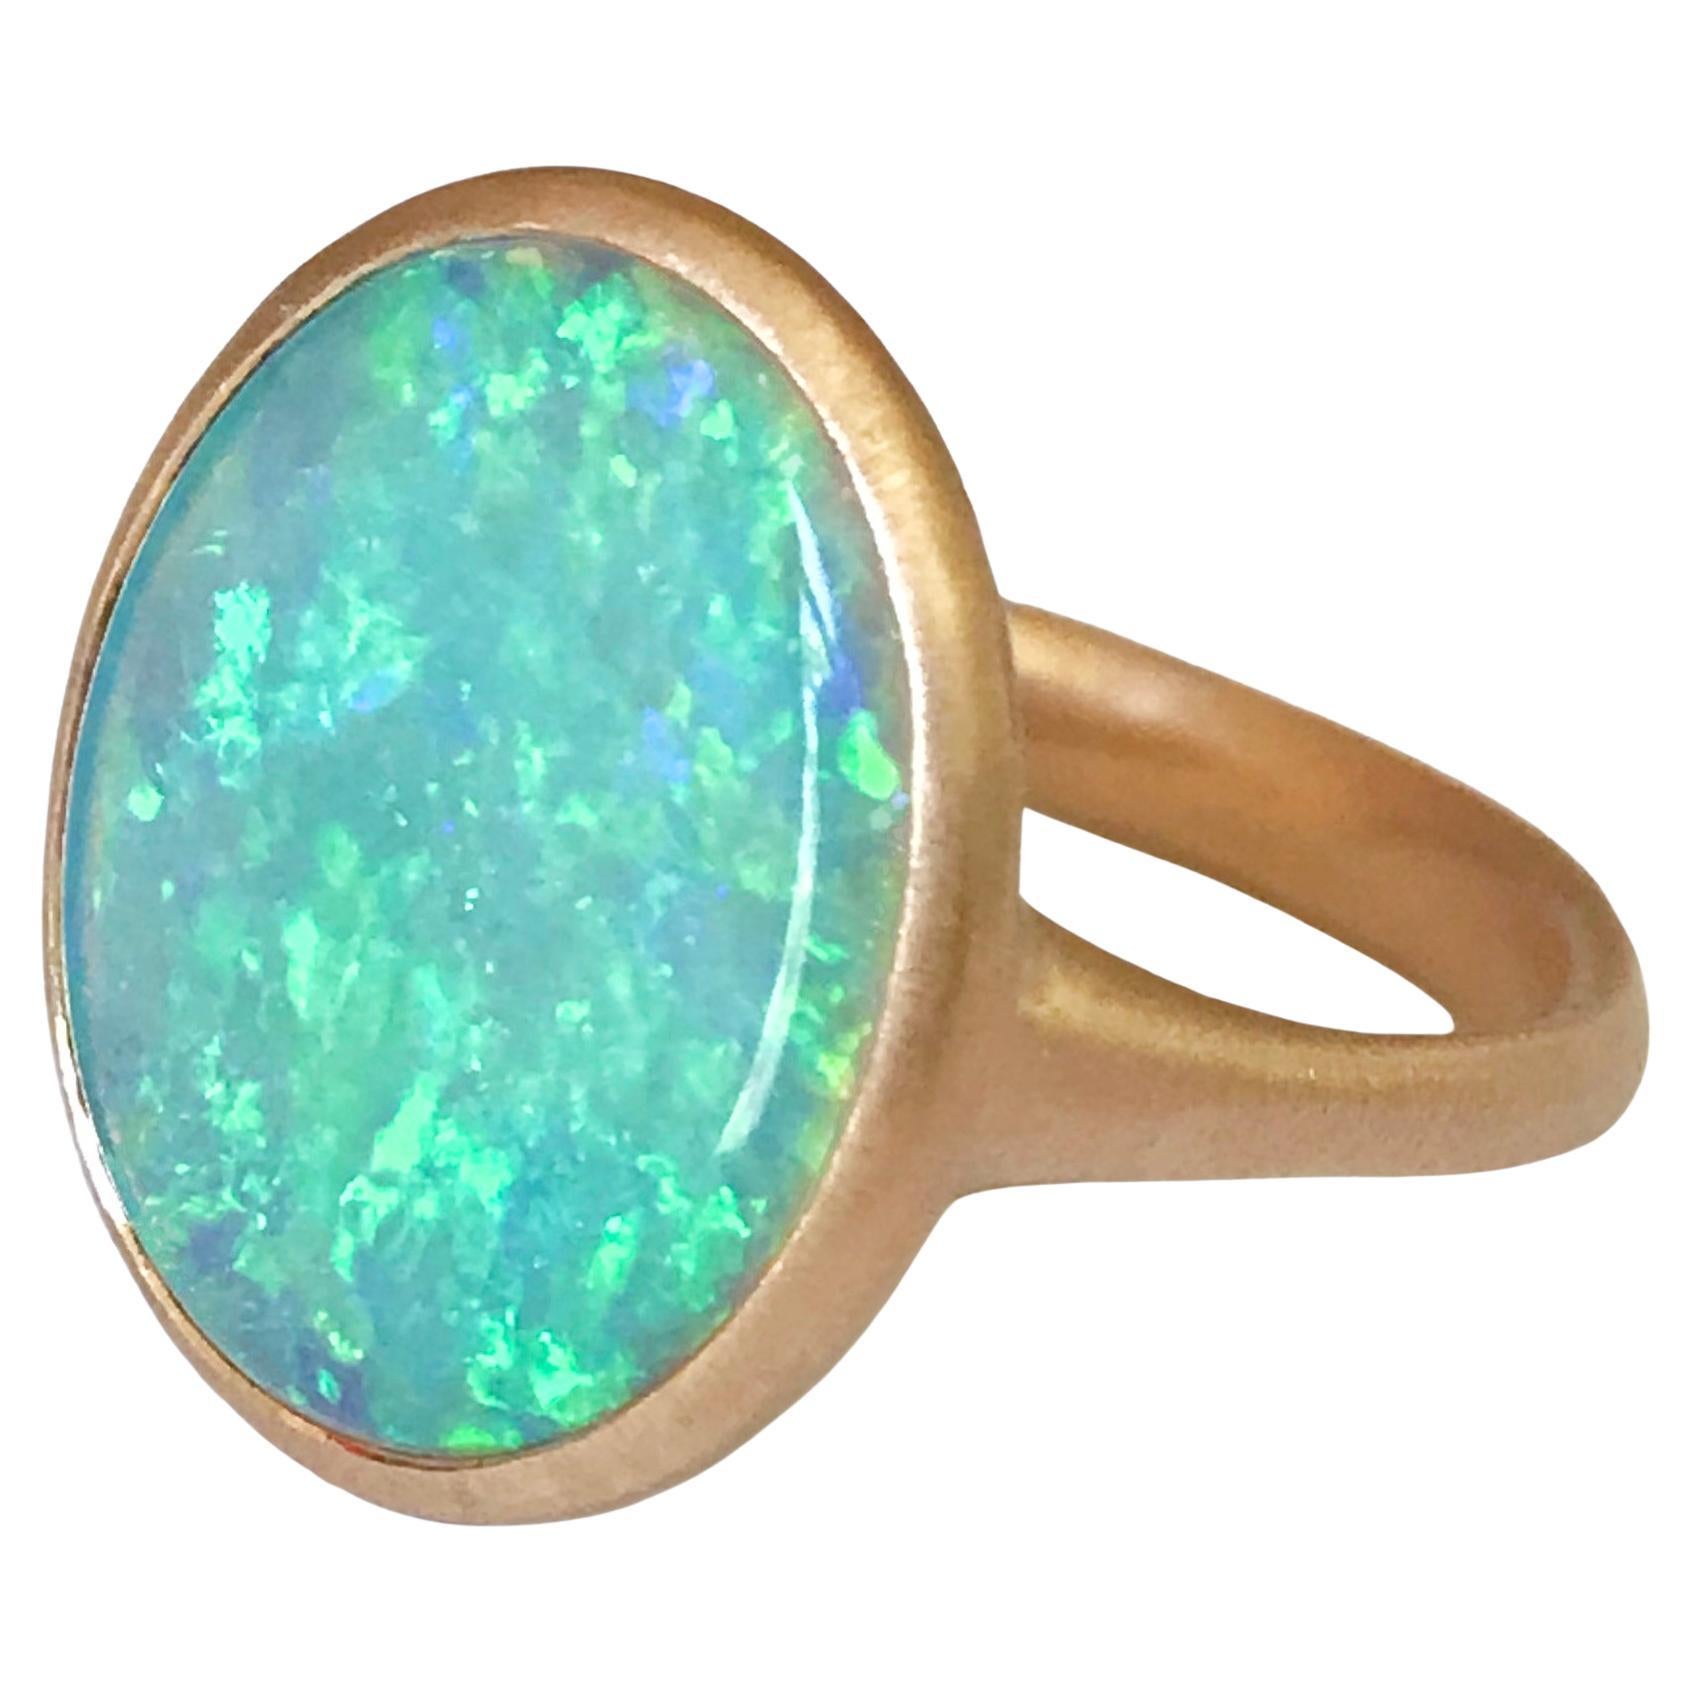 Dalben Rose Gold Ring With Coober Pedy Opal